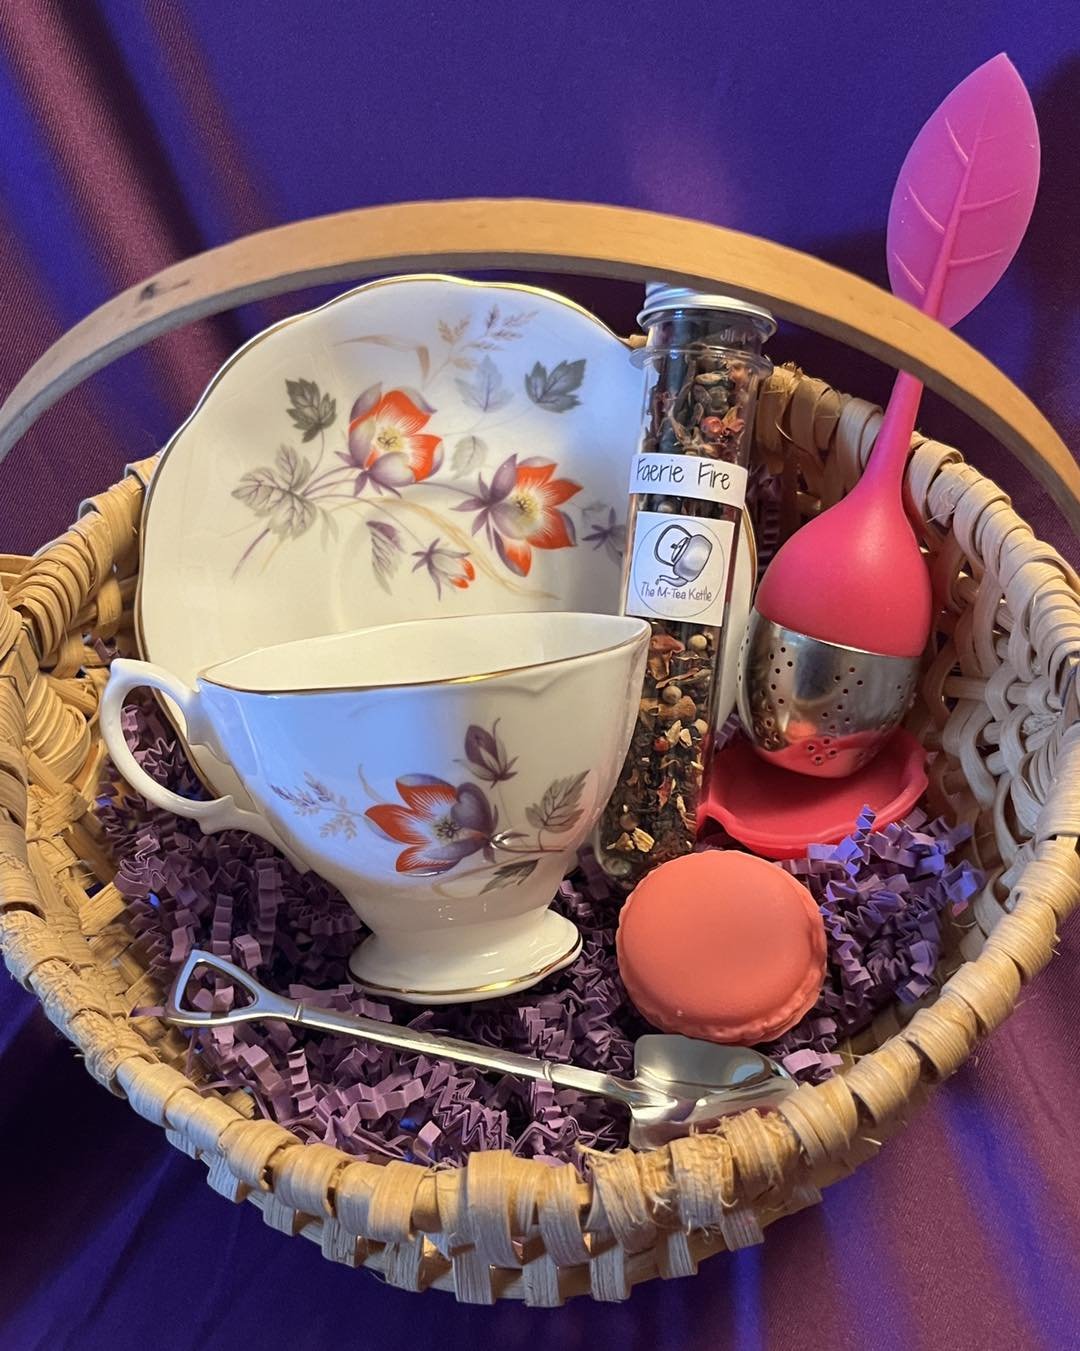 Wanted to show off these beautiful gift sets!! 
.
.
#mteakettle #tea #teatime #witchyvibes #looseleafteashop #nerdytea #looseleafteas #artisantea #dndtea #witchythings #pixelsapothecary #teashop #looseleafteablends #witchystuff #herbaltea #looseleaft